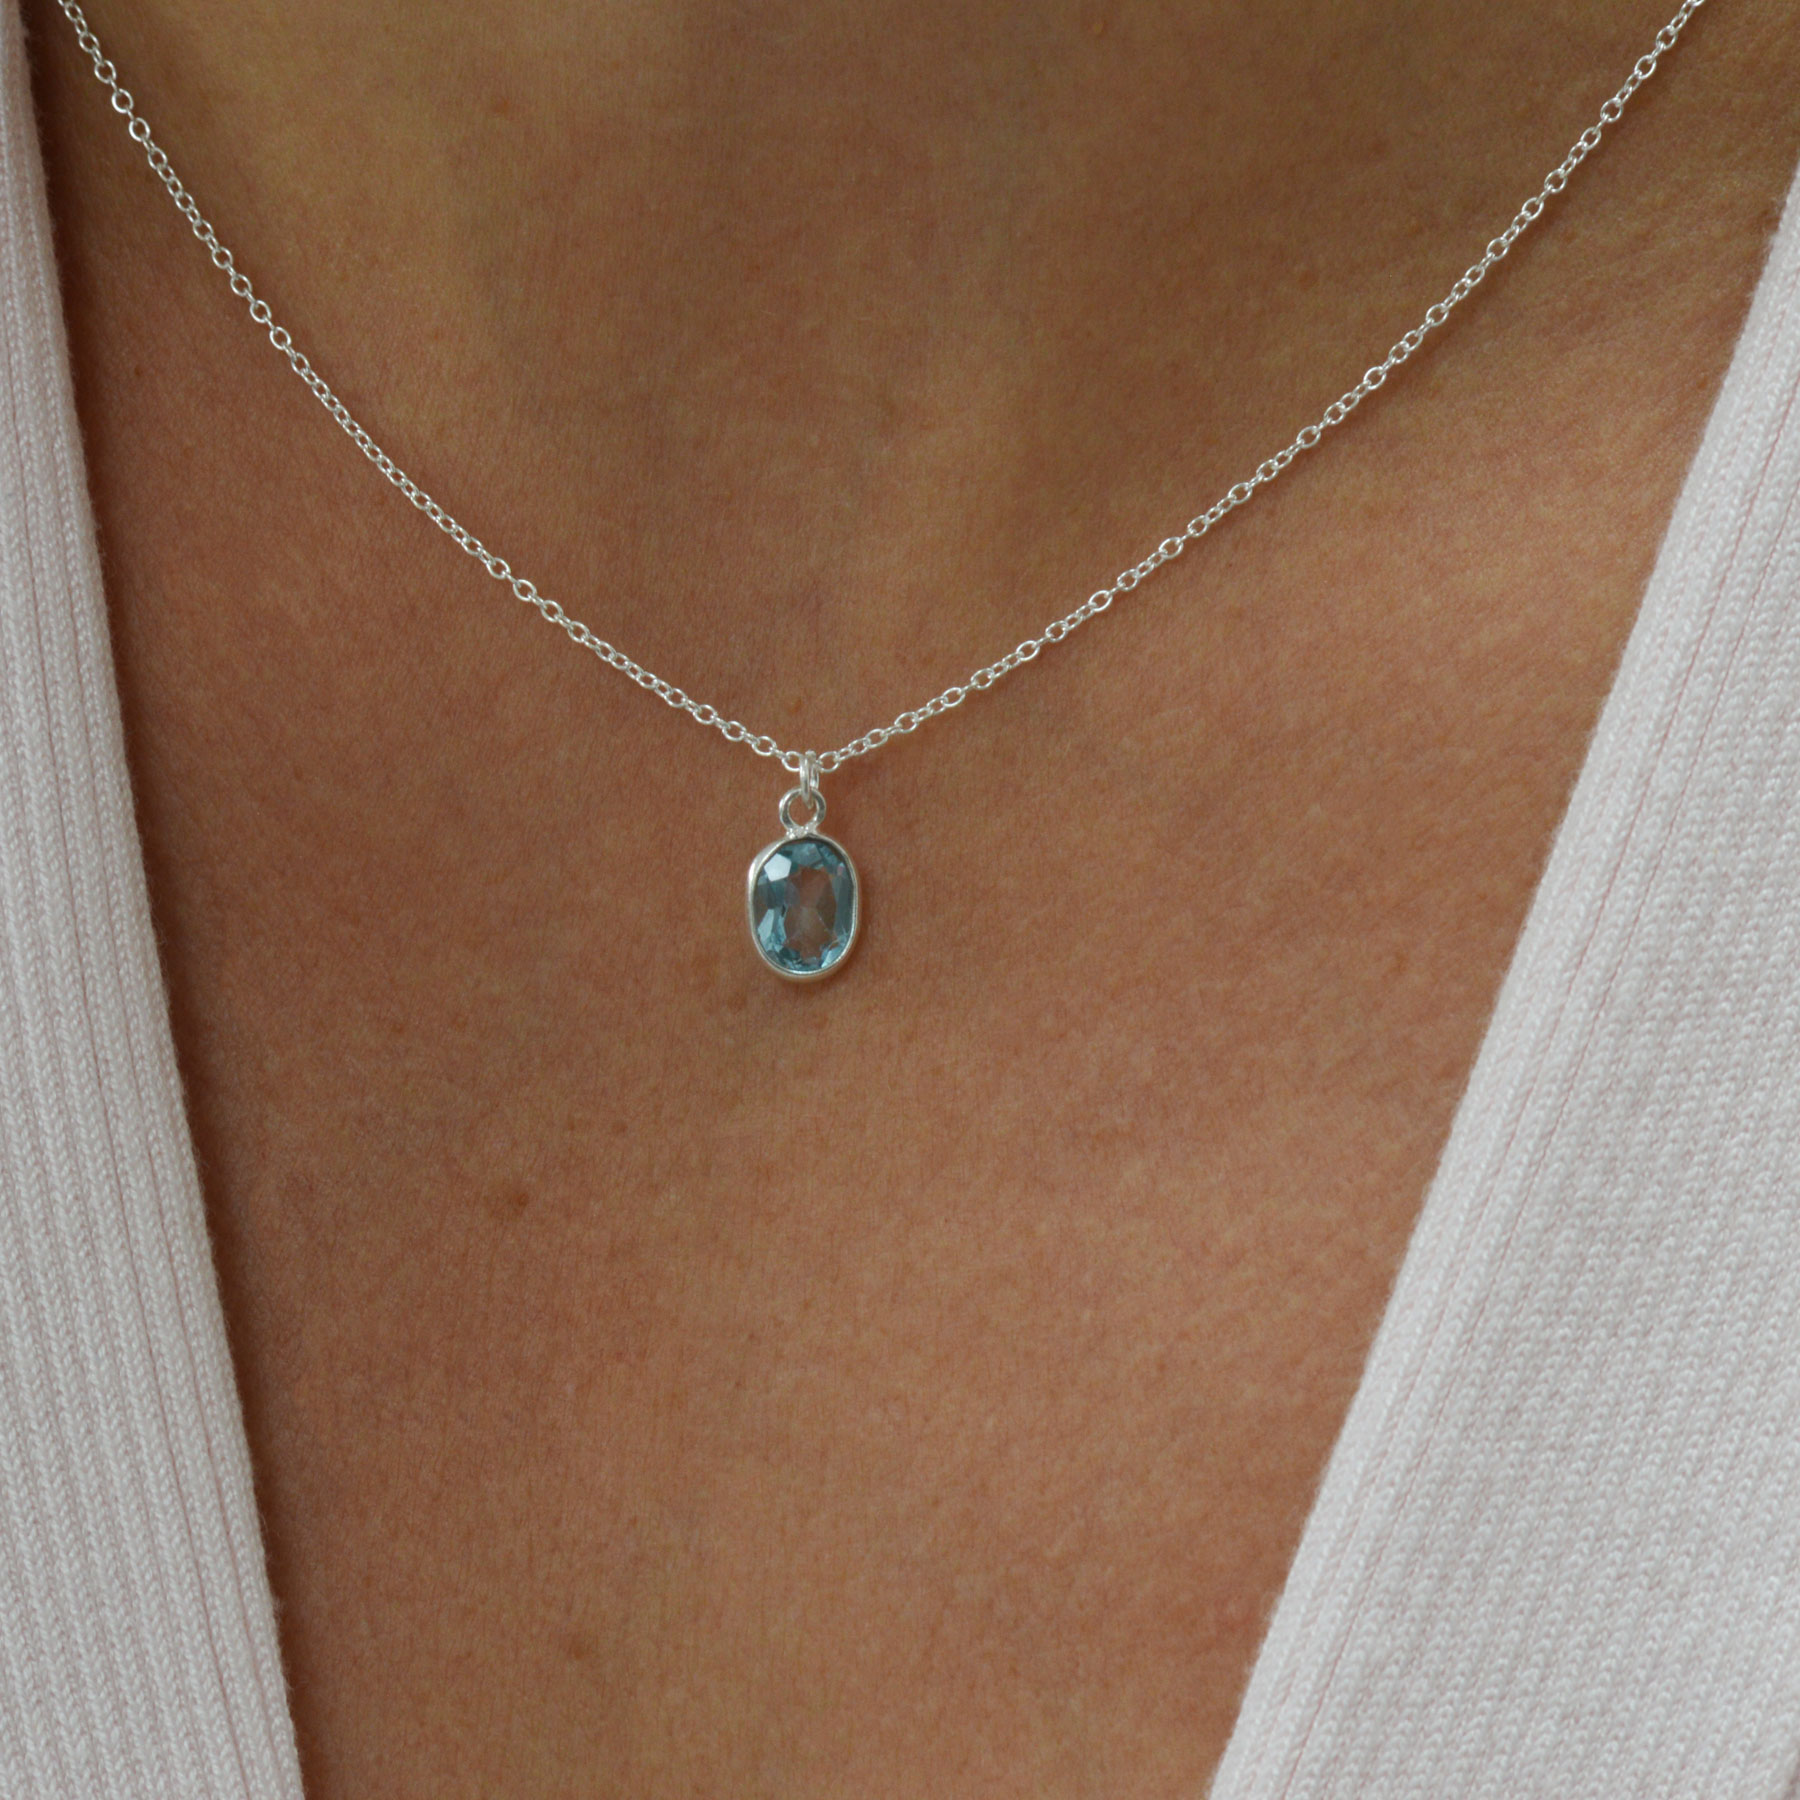 CLARICE CLIFF TALL Trees Style Sterling Silver and Blue Topaz Necklace  November £40.00 - PicClick UK